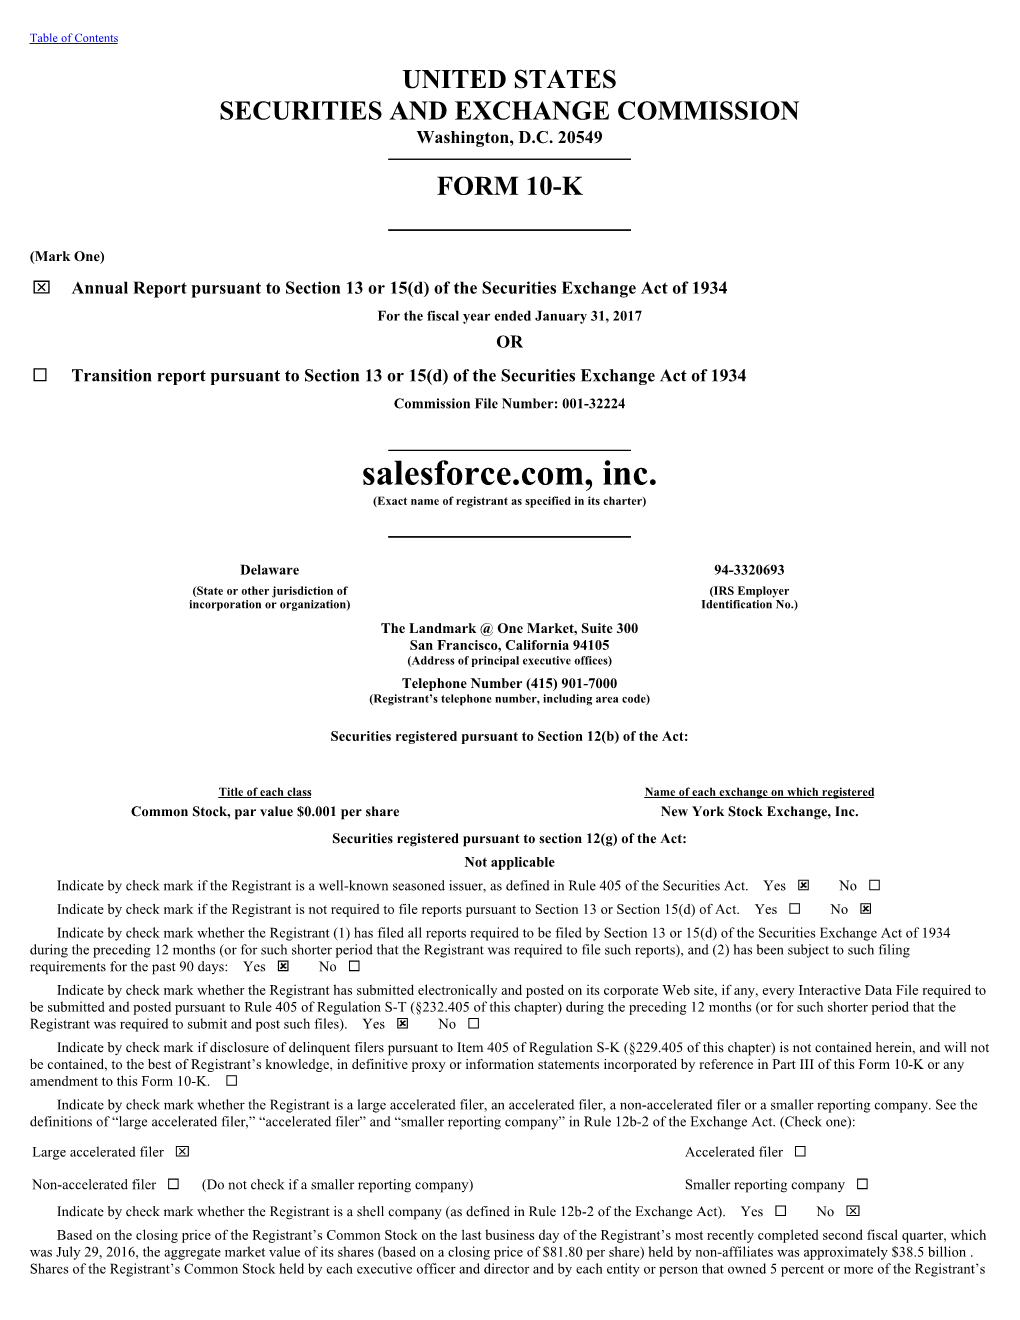 Salesforce.Com, Inc. (Exact Name of Registrant As Specified in Its Charter)